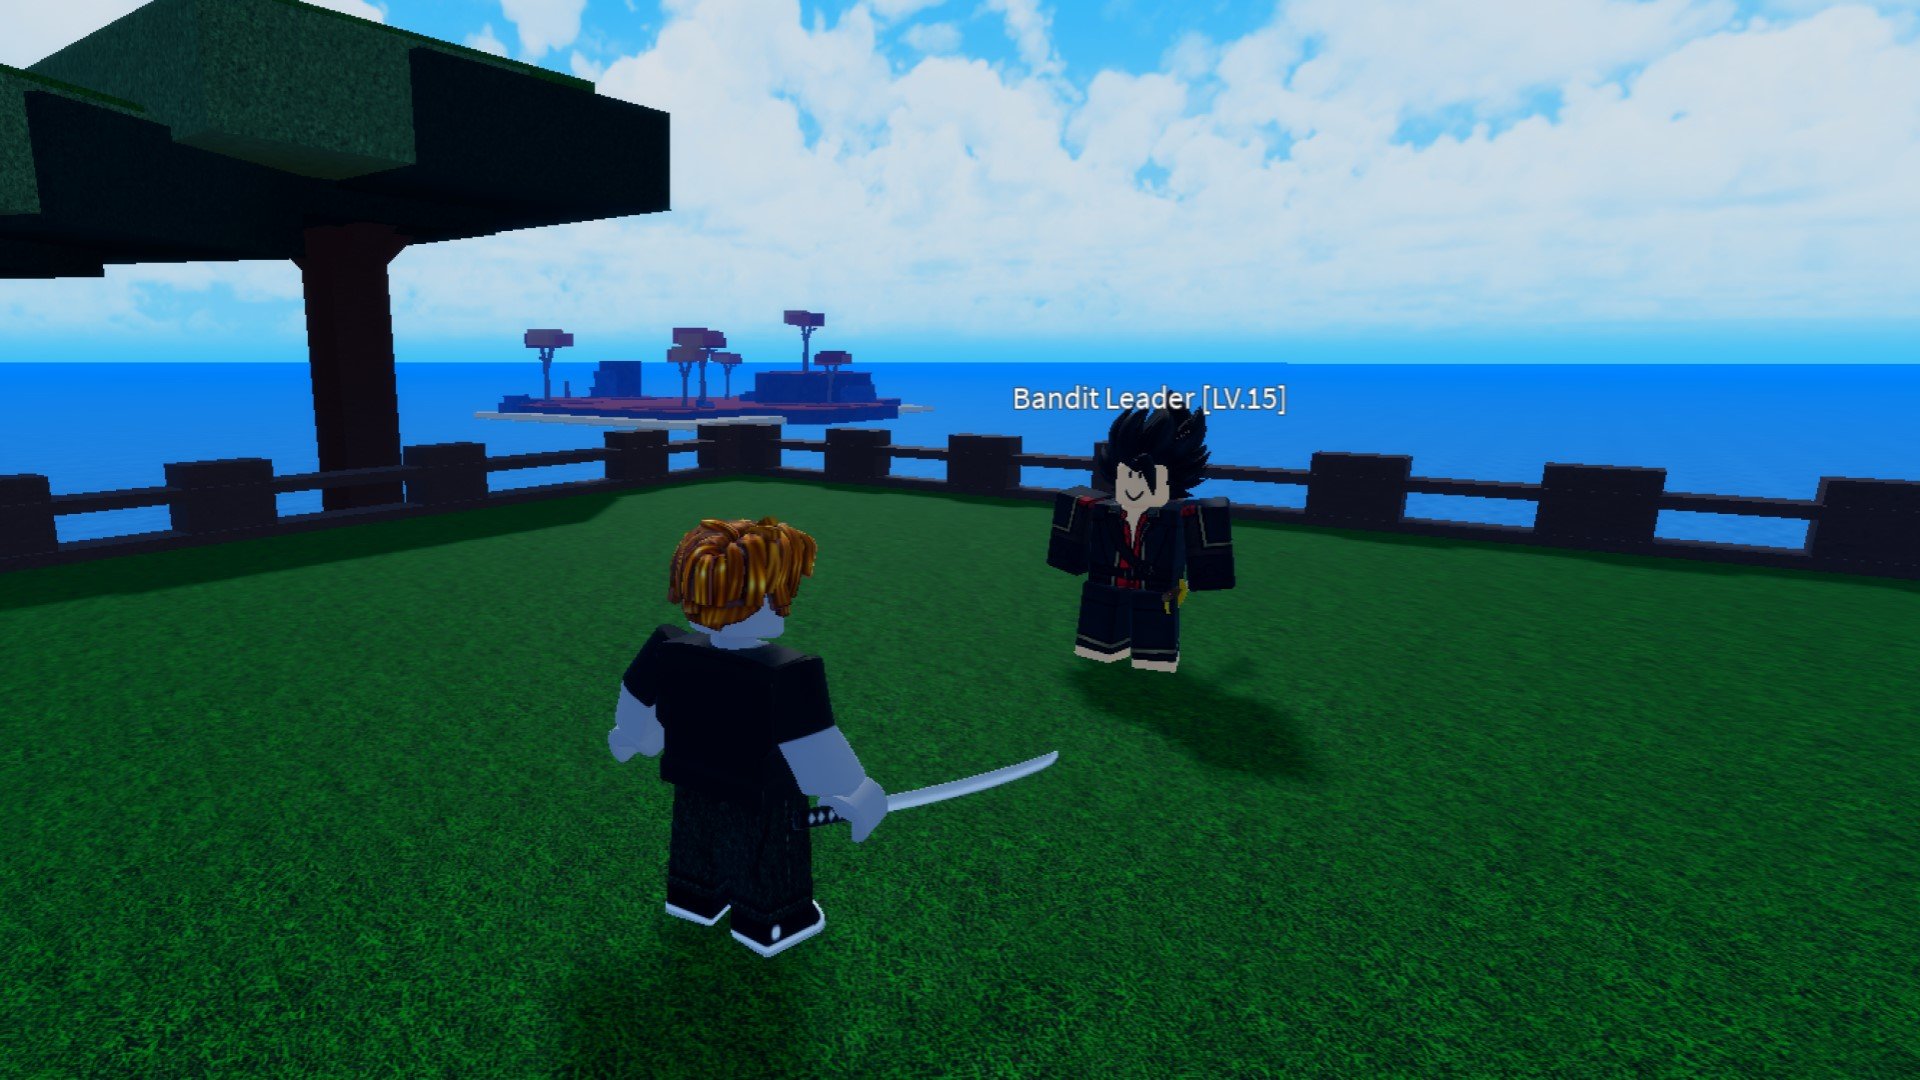 A character from Roblox game Second Piece facing down a Bandit Leader, Katana in hand. In the background, bright blue skies filled with clouds.